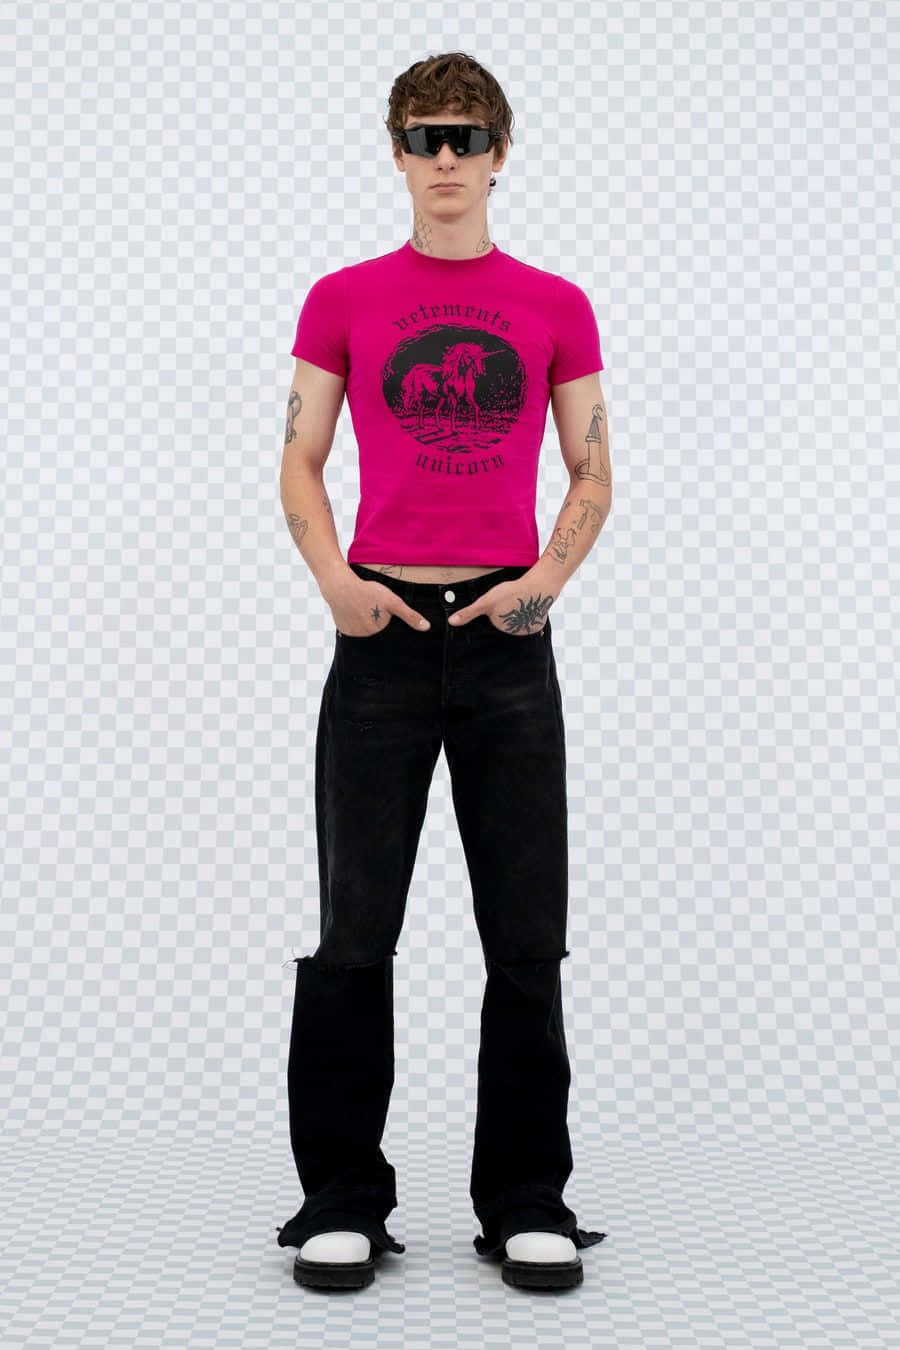 A Man In A Pink Shirt And Black Pants